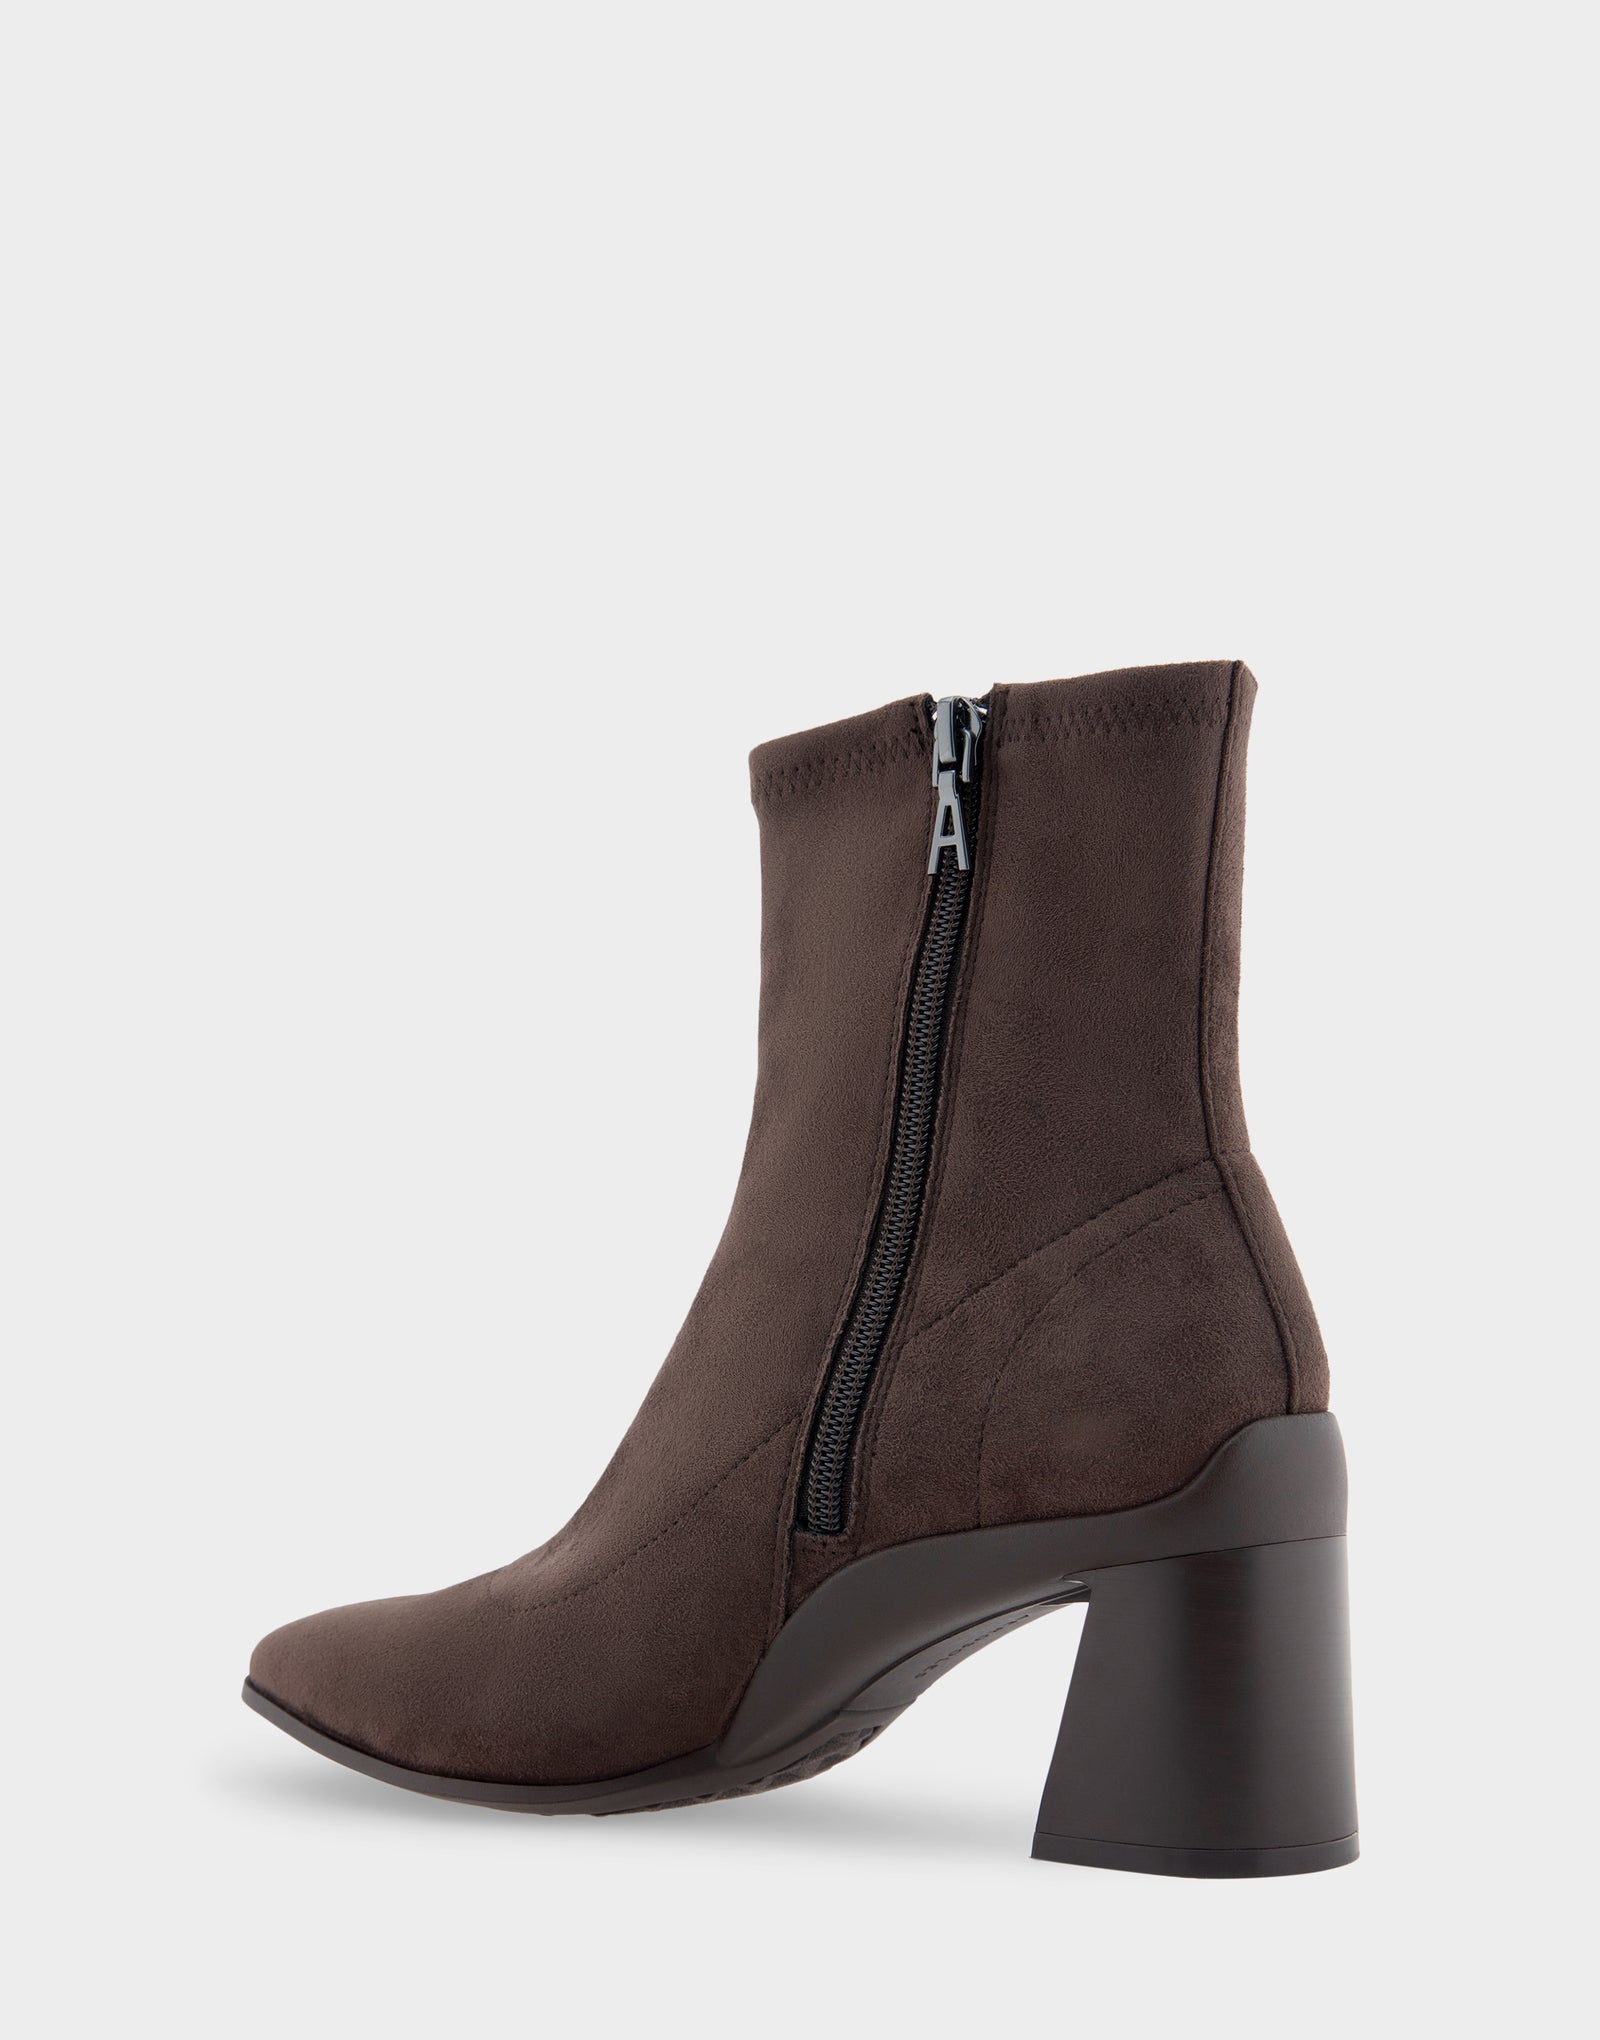 Women's Heeled Ankle Boot in Brown